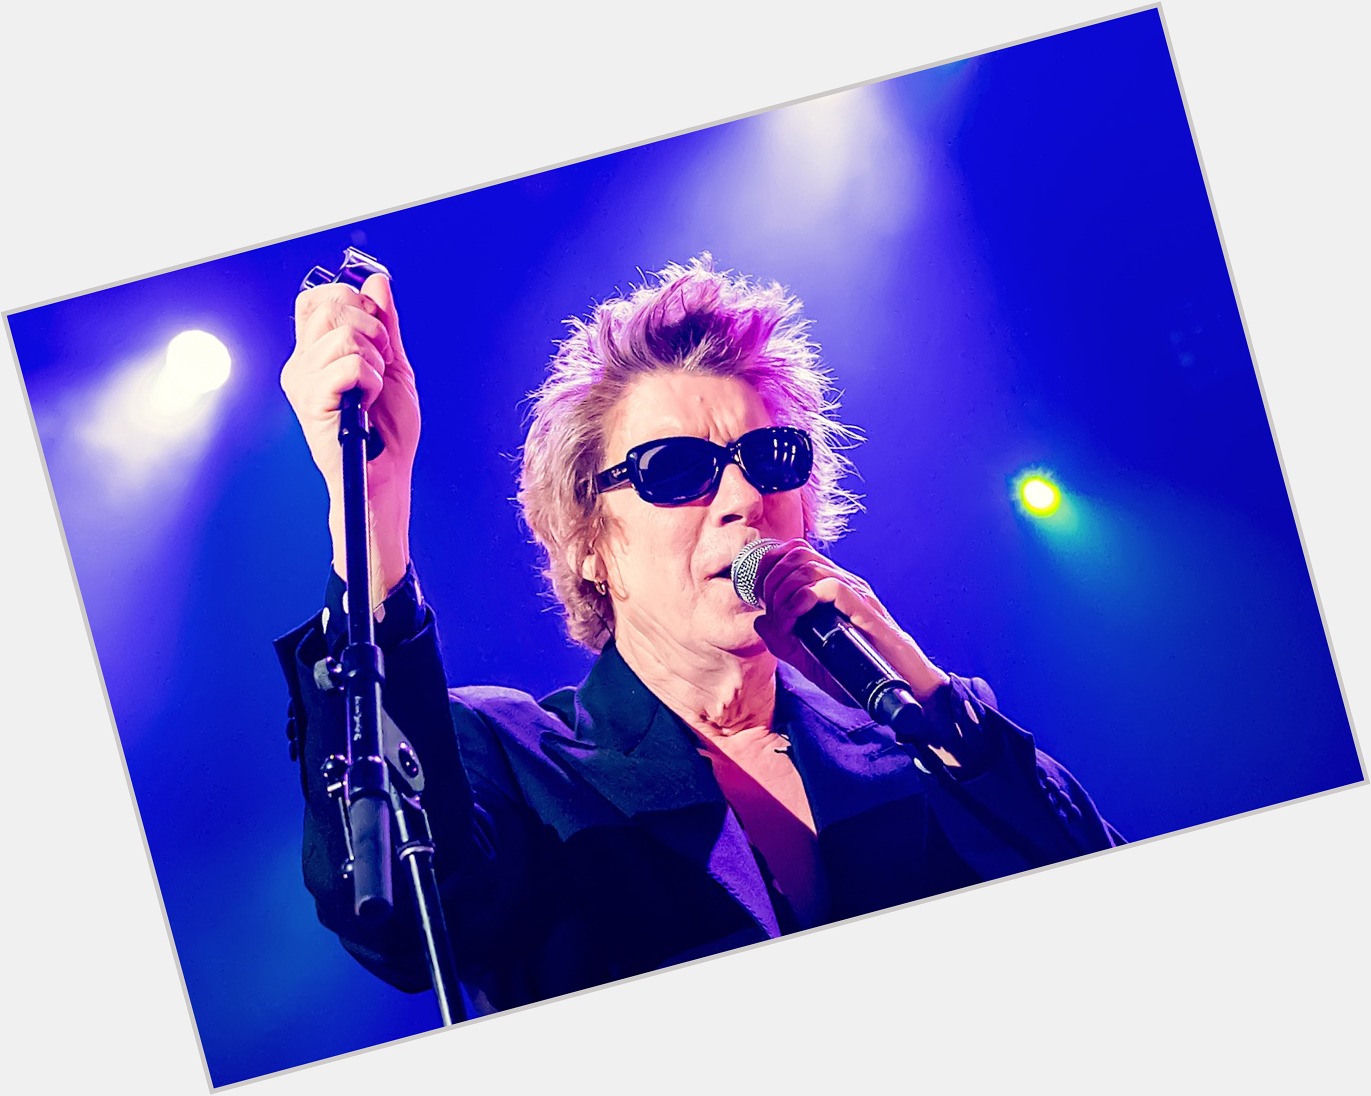 HAPPY 64TH BIRTHDAY RICHARD BUTLER    June 5, 1956

The Psychedelic Furs
Love Spit Love 